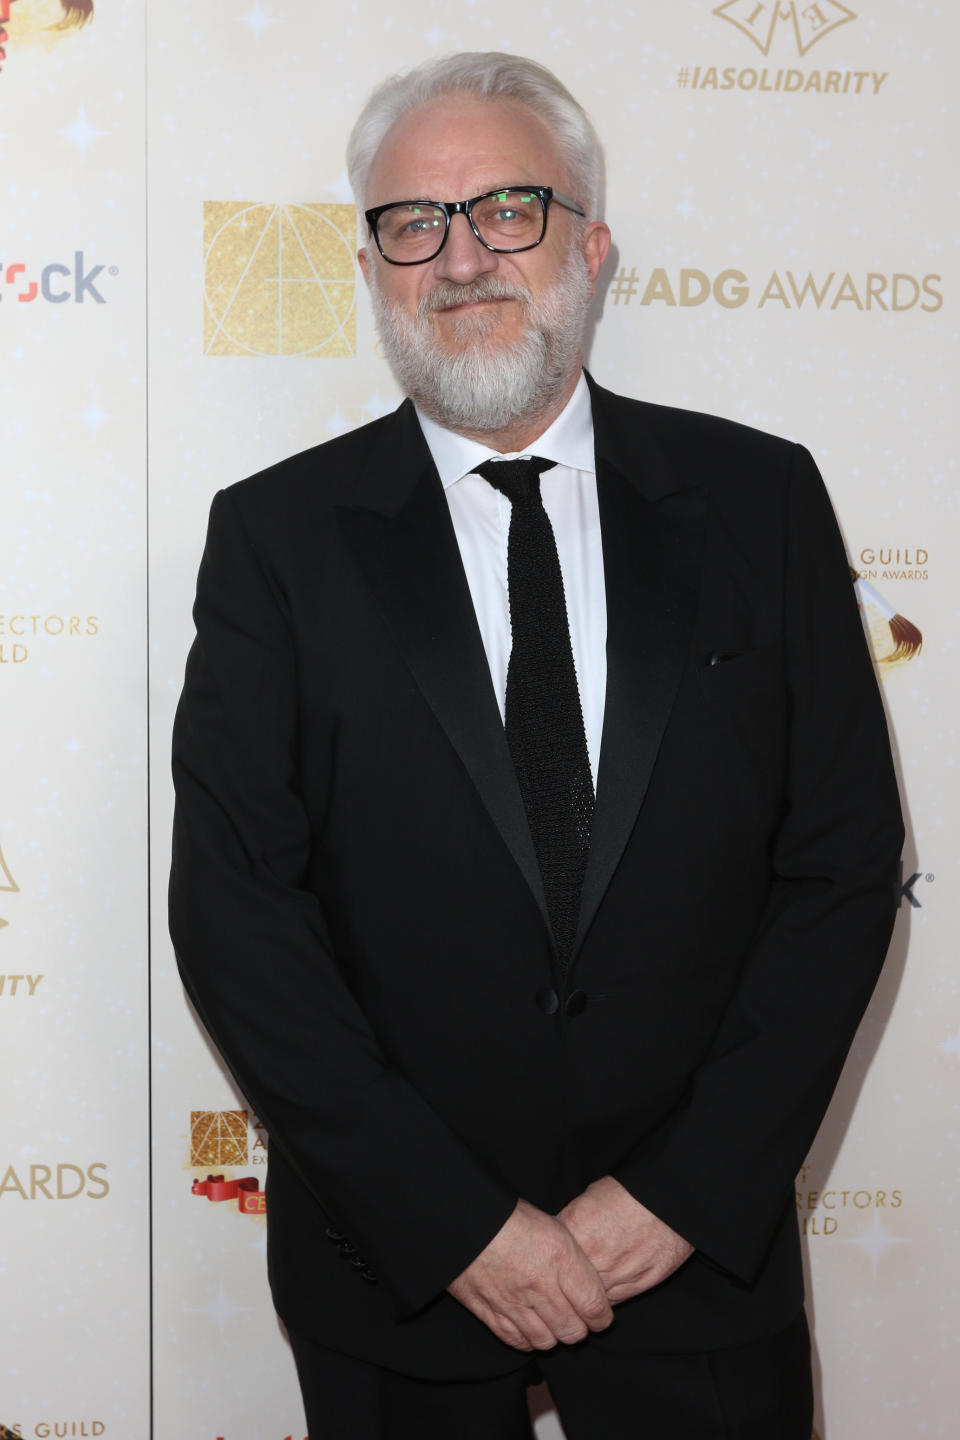 Martin Childs at the 22nd Annual Art Directors Guild Awards held at Ray Dolby Ballroom on January 27, 2018 in Hollywood, CA, USA (Photo by JC Olivera/Sipa USA)